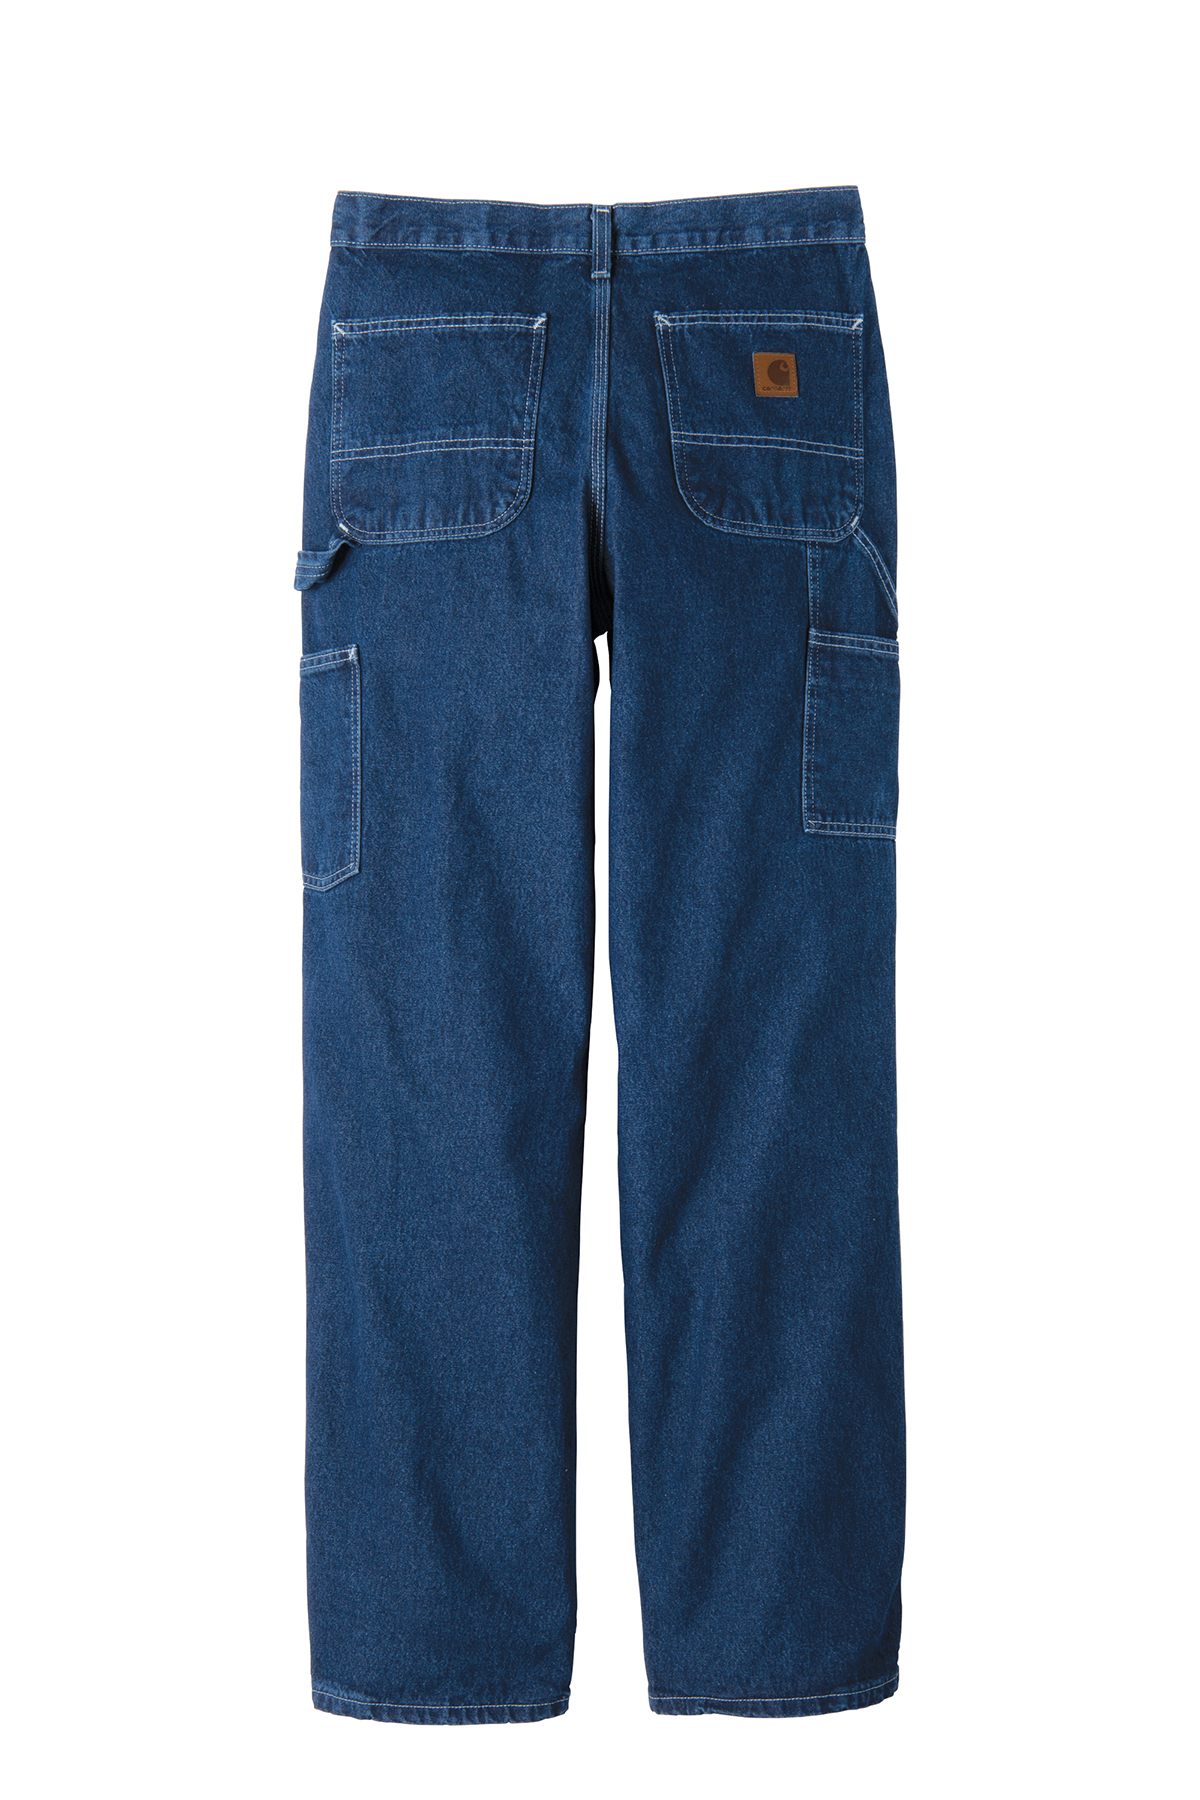 Carhartt ® Loose-Fit Work Dungaree | Rocky Mountain Embroidery ...